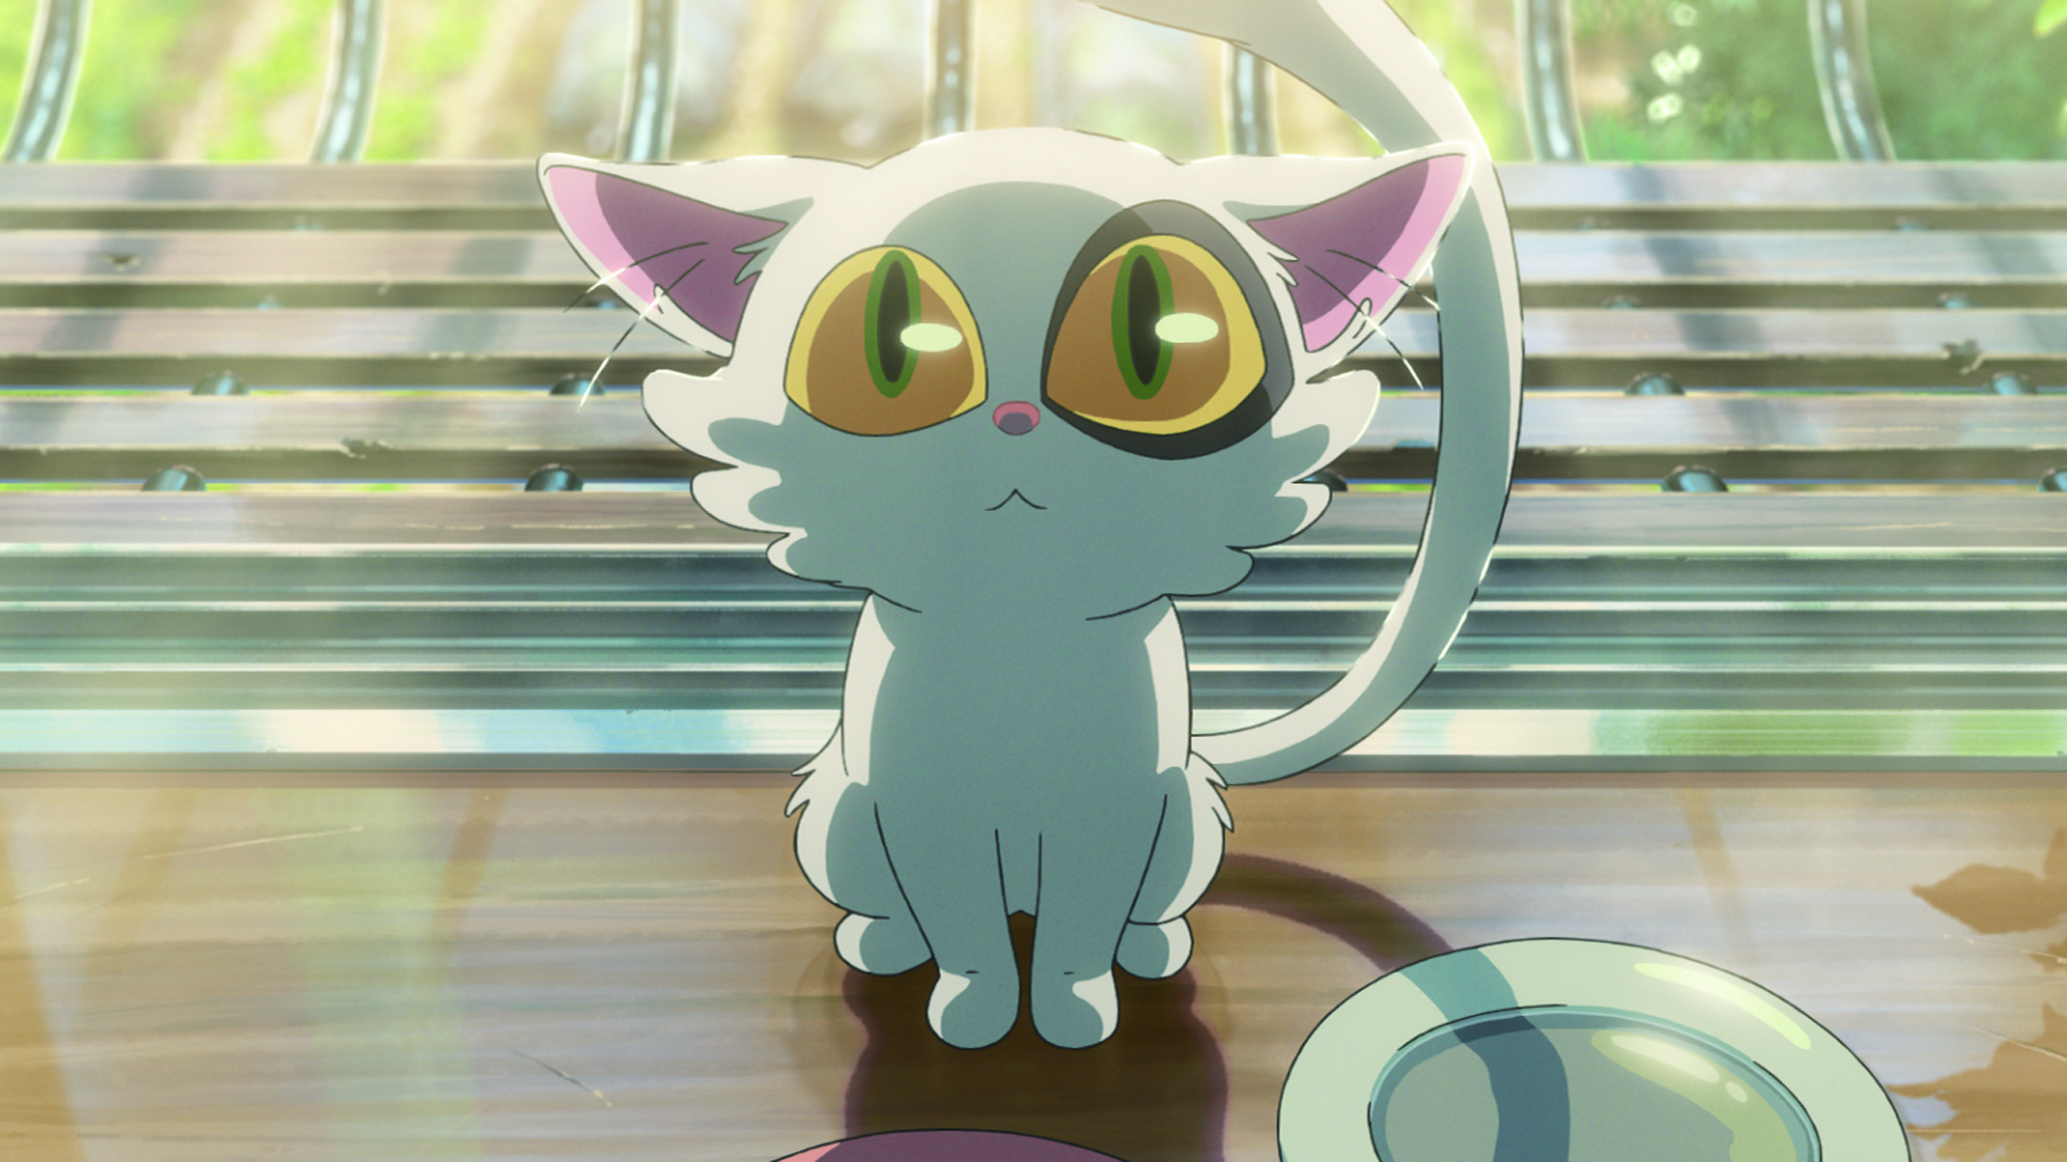 Is this cat an ally or a friend? Image courtesy of Toho Co., Ltd